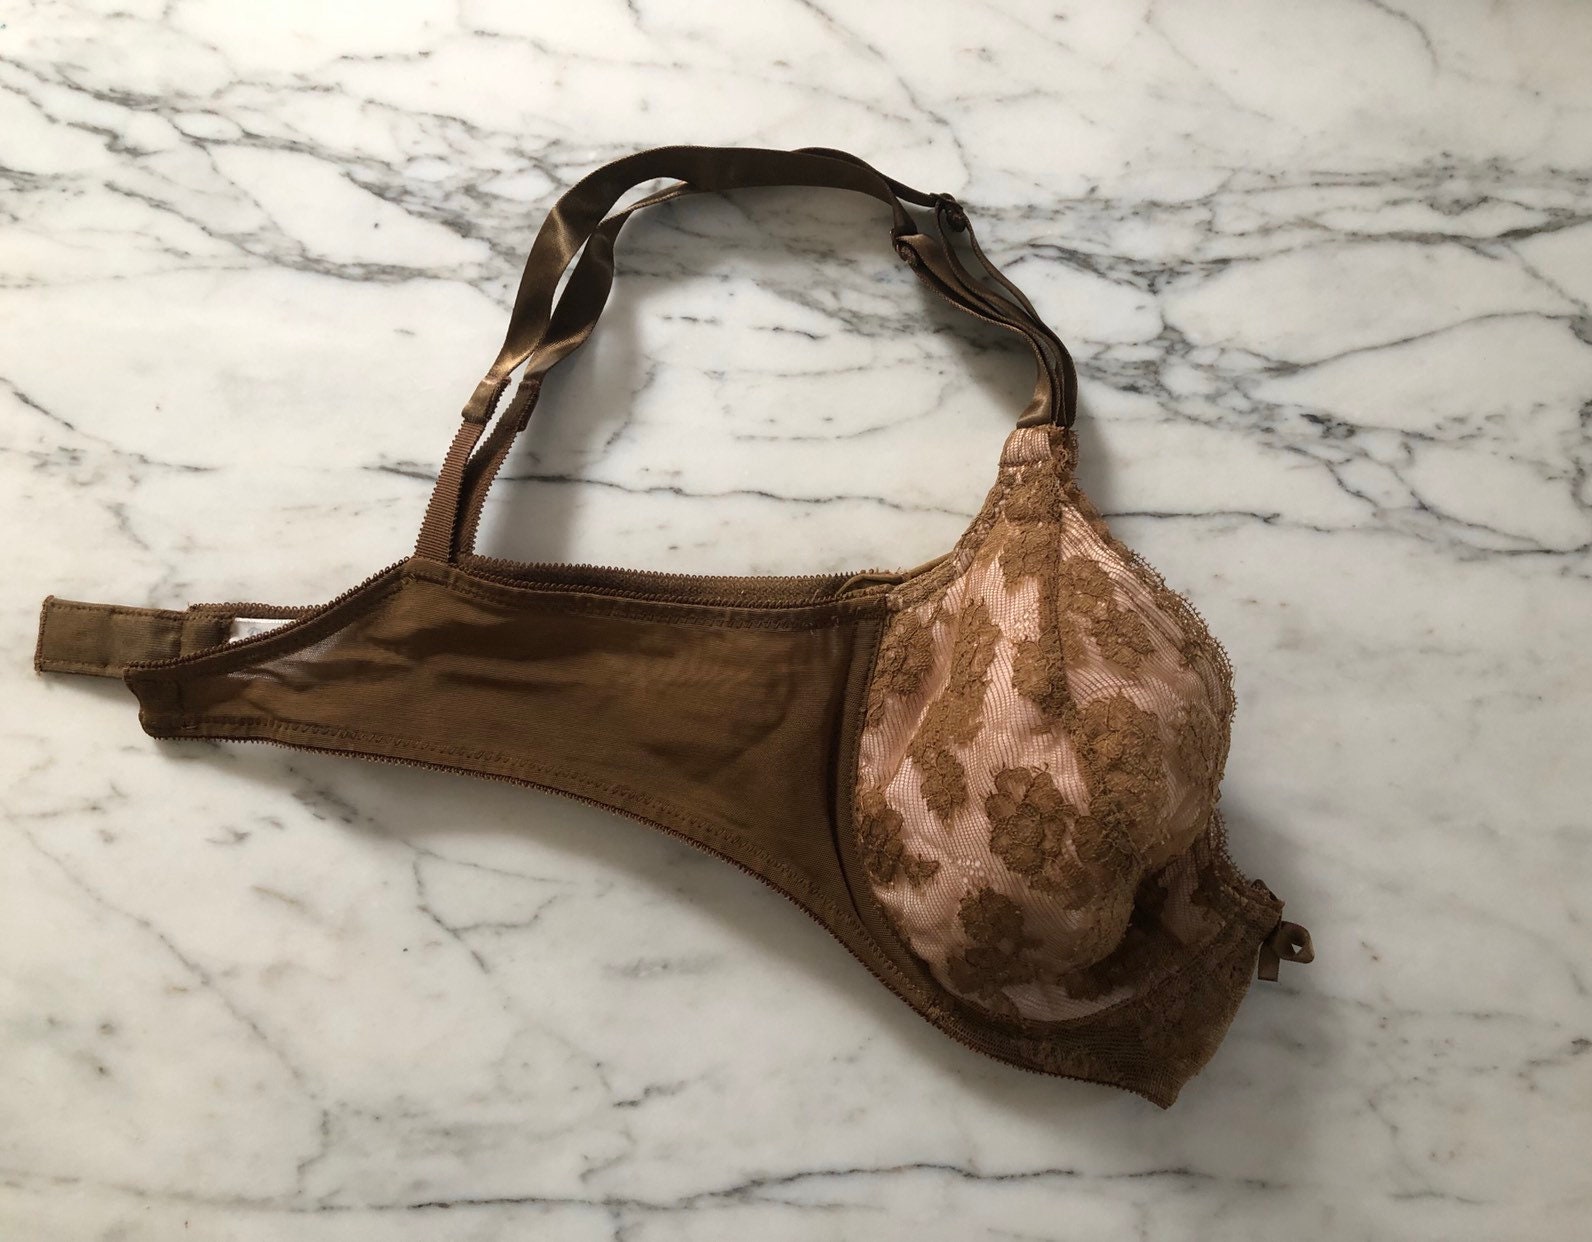 70s Lace Bra Vintage Vanity Fair Lace Padded Bra Cocoa, 41% OFF